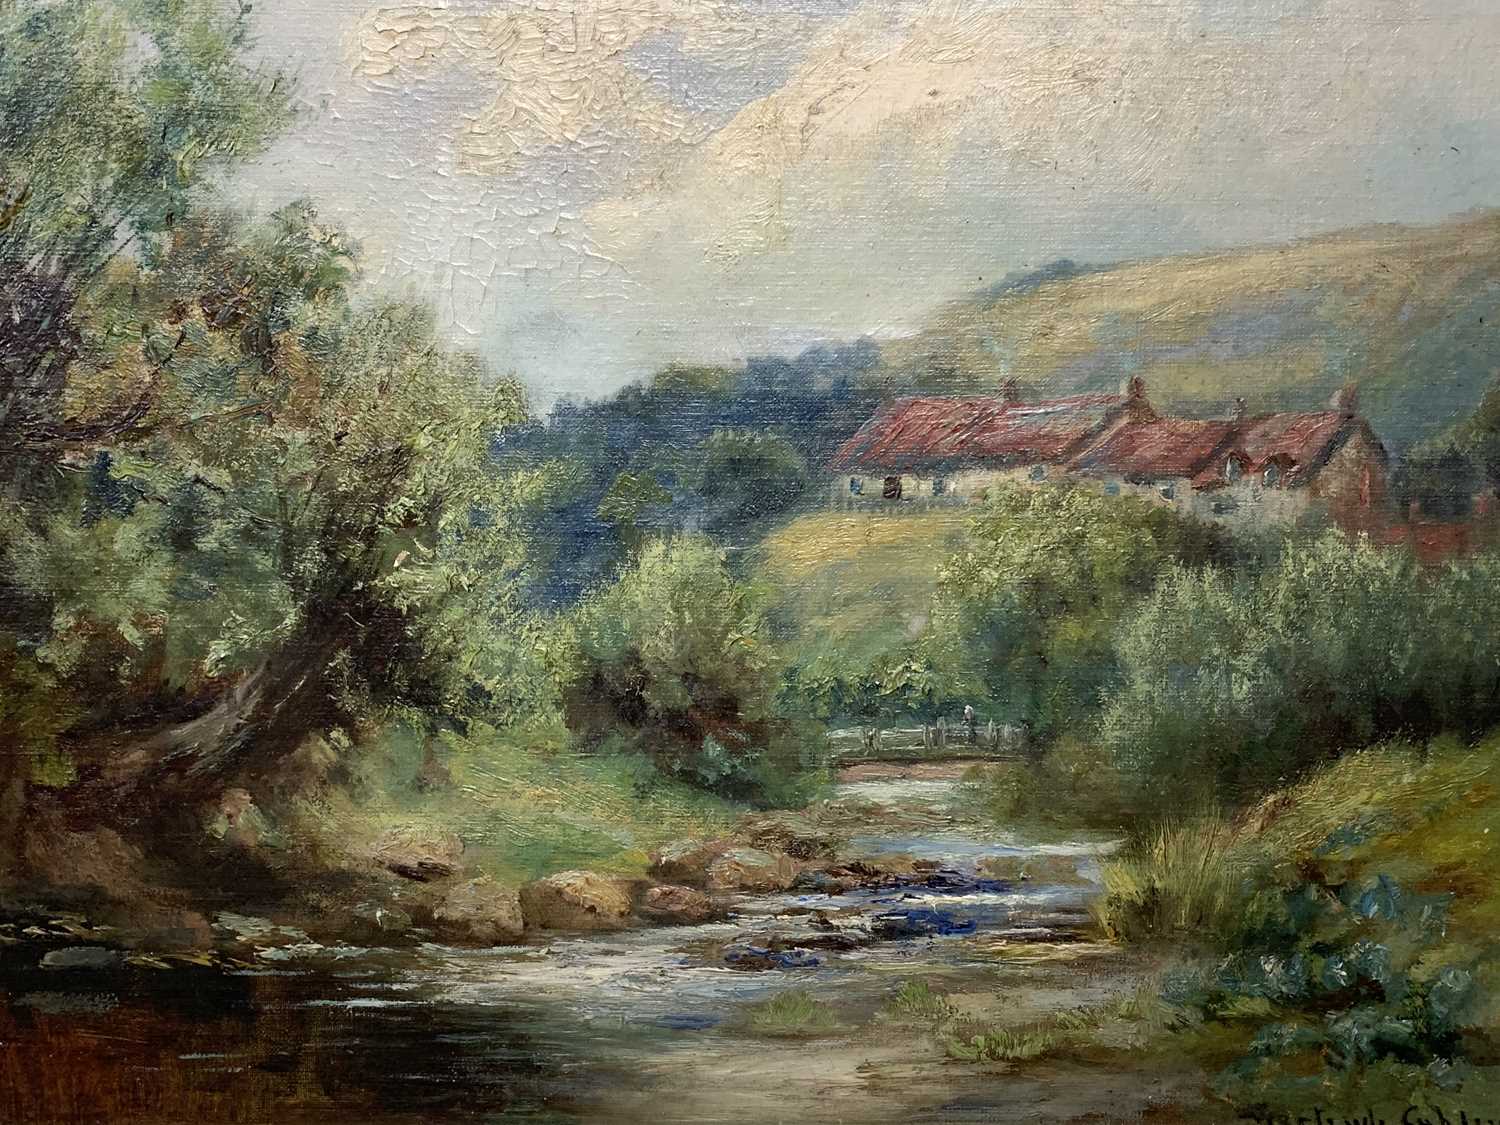 GERTRUDE CUBLEY (wife of Henry Hadfield Cubley) oil on board - River Scene with red roofed